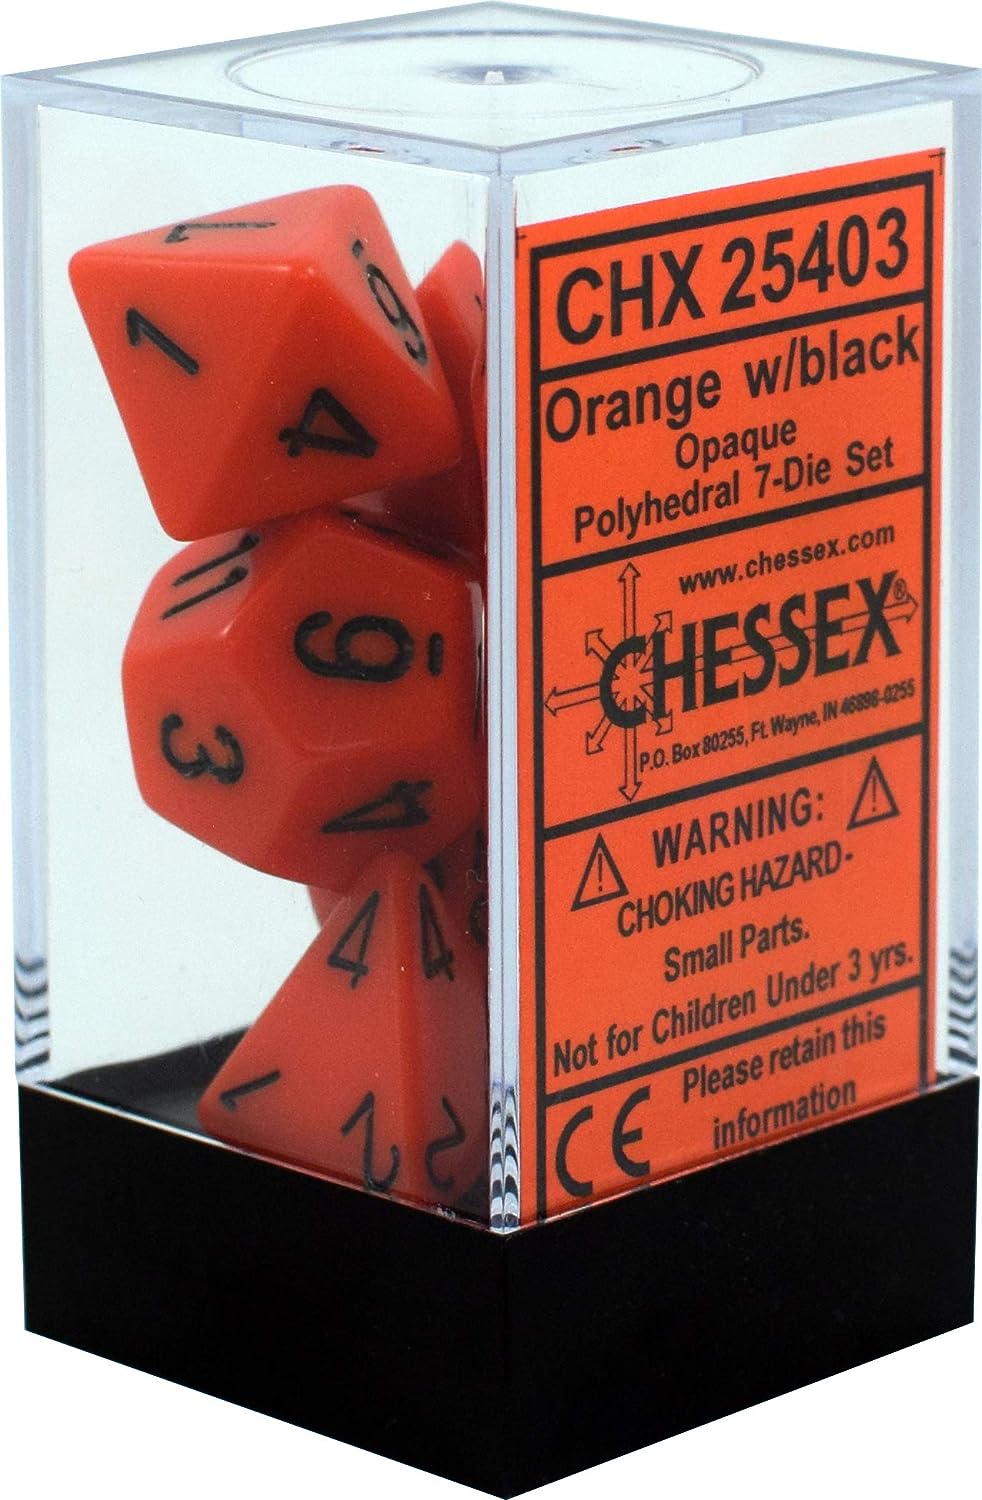 DND Dice Set-Chessex D&D Dice-16mm Opaque Orange and Black Plastic Polyhedral Dice Set-Dungeons and Dragons Dice Includes 7 Dice